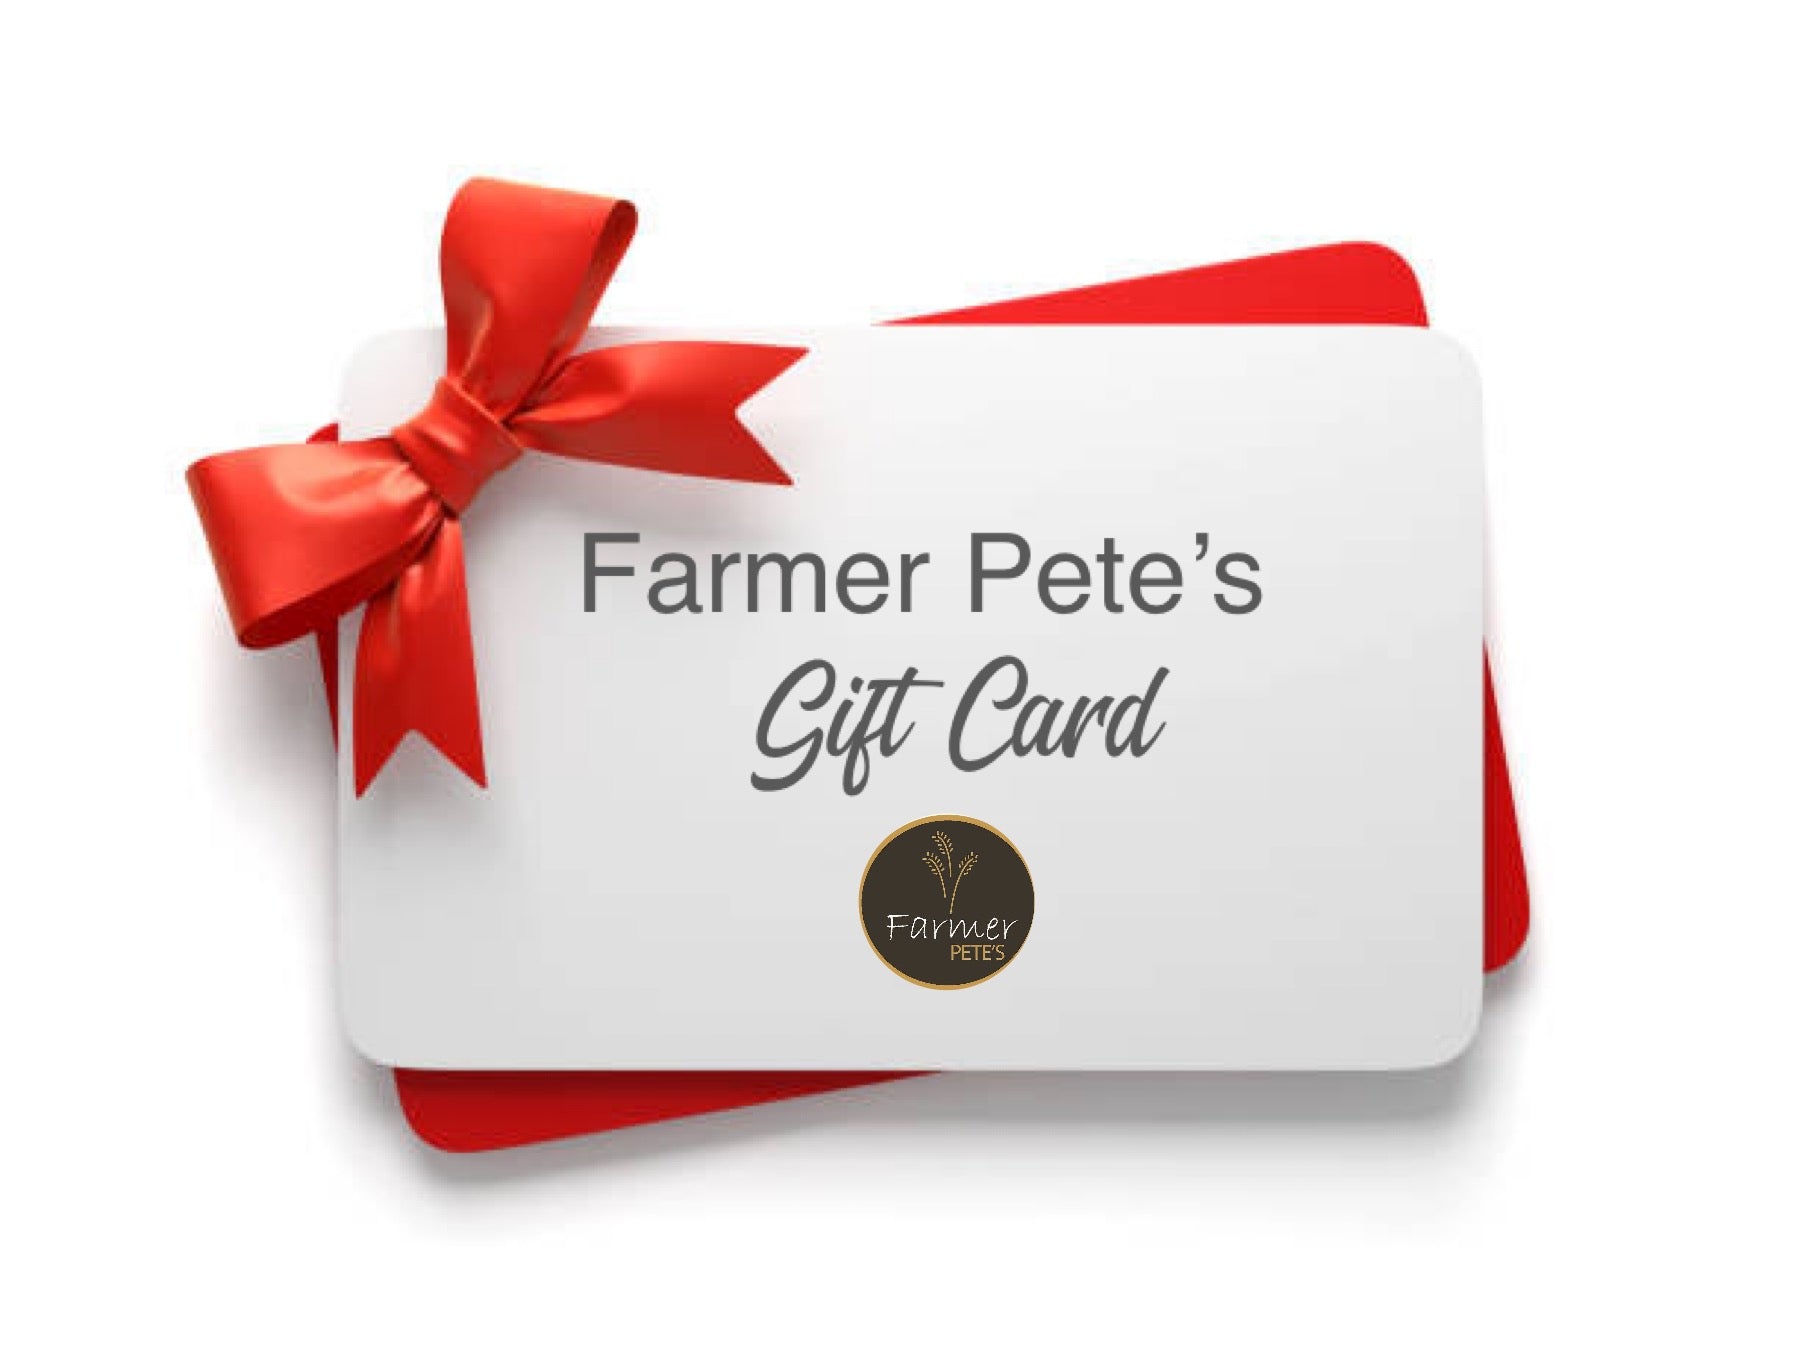 Farmer Pete's online gift card to shop